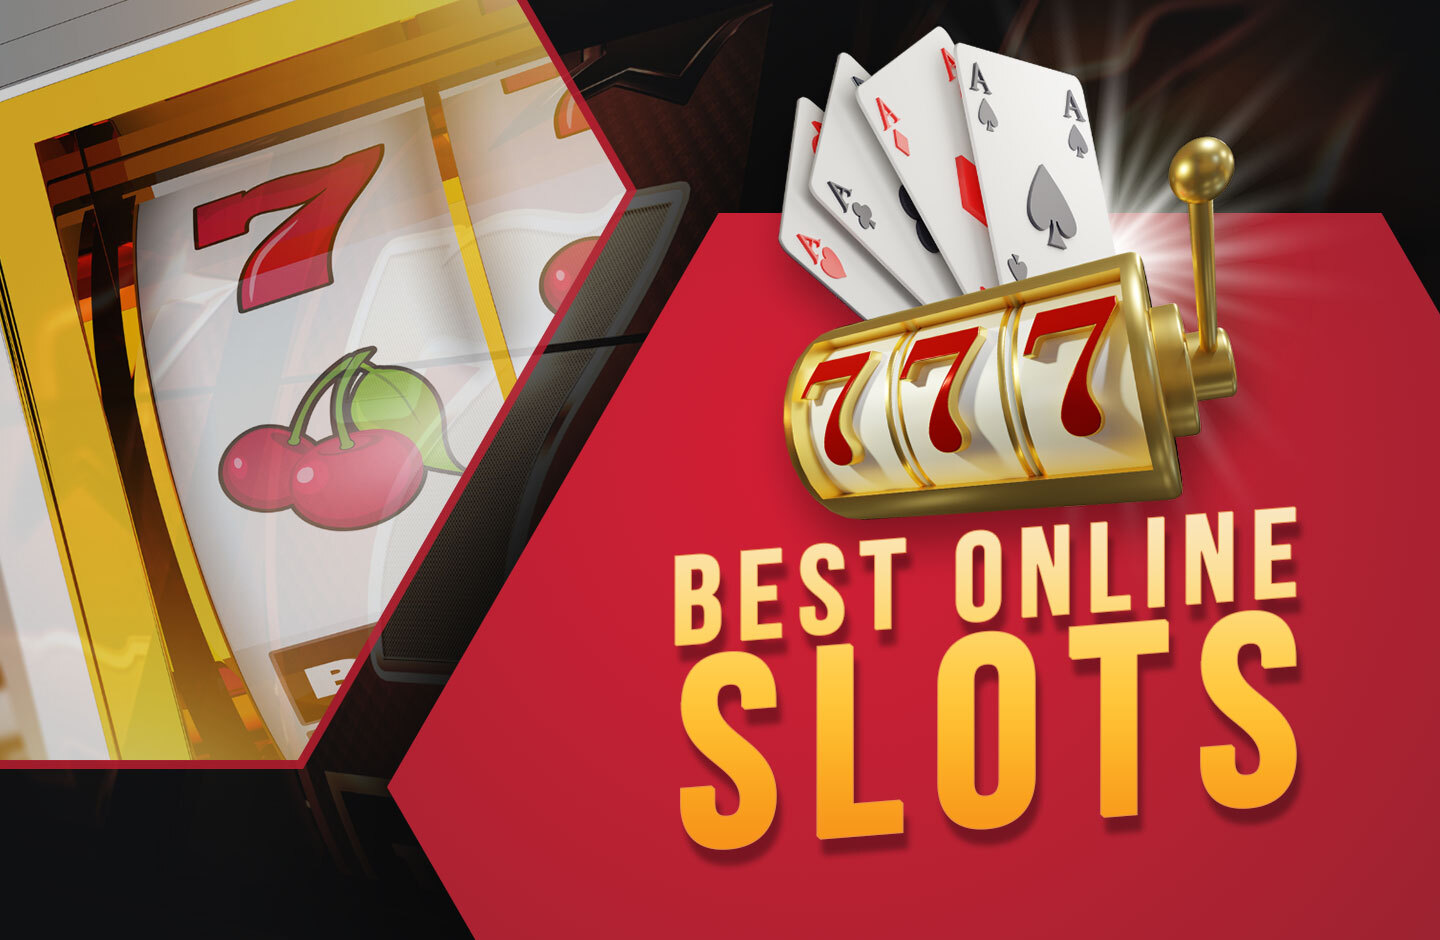 Betwinner Promo Code! 10 Tricks The Competition Knows, But You Don't